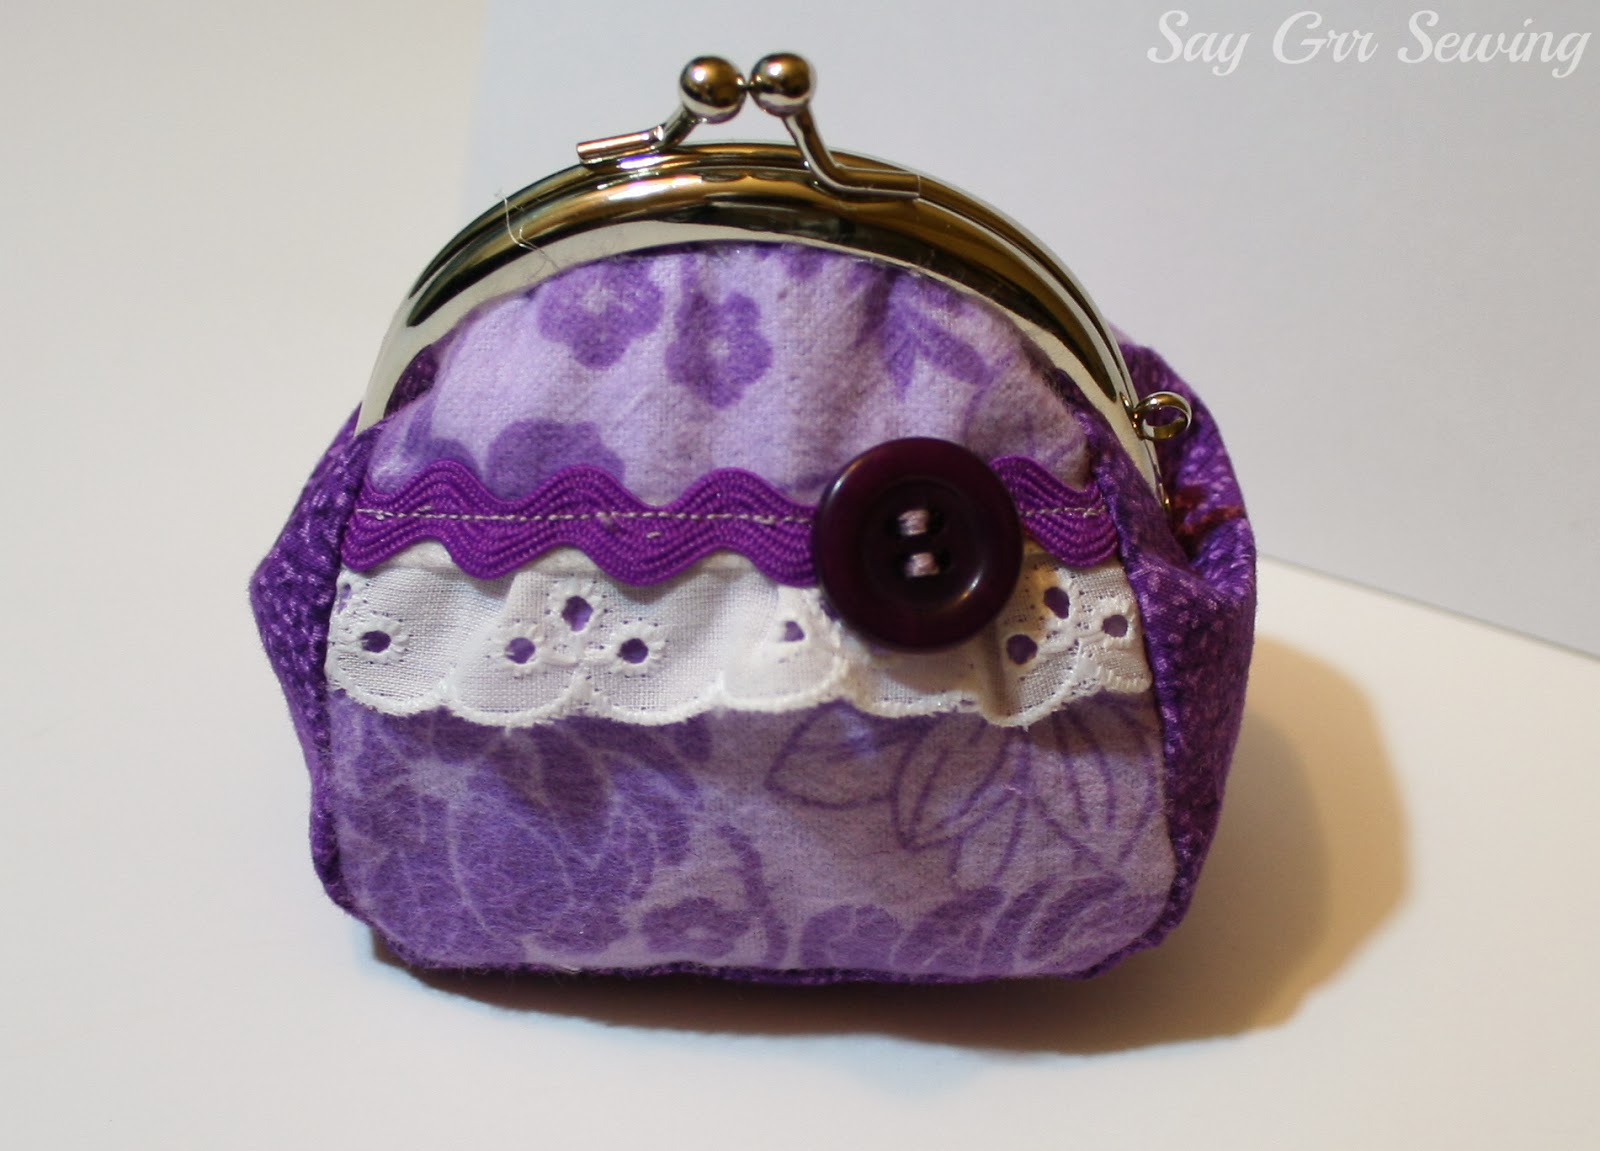 Say Grr Sewing: Gusseted Coin Purse Pattern